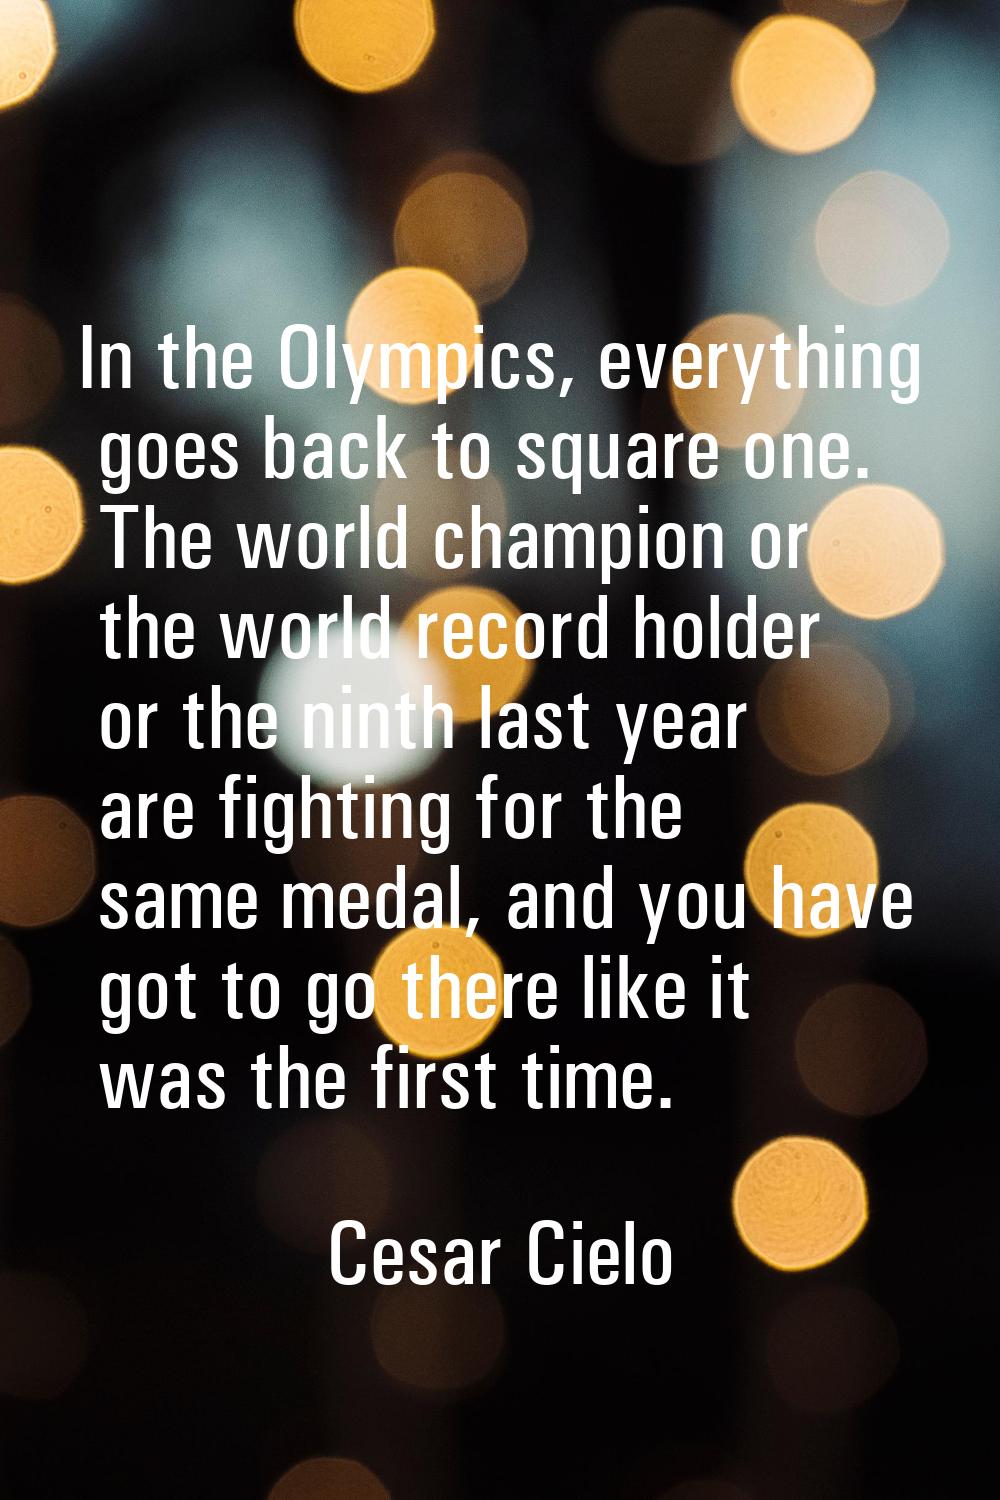 In the Olympics, everything goes back to square one. The world champion or the world record holder 